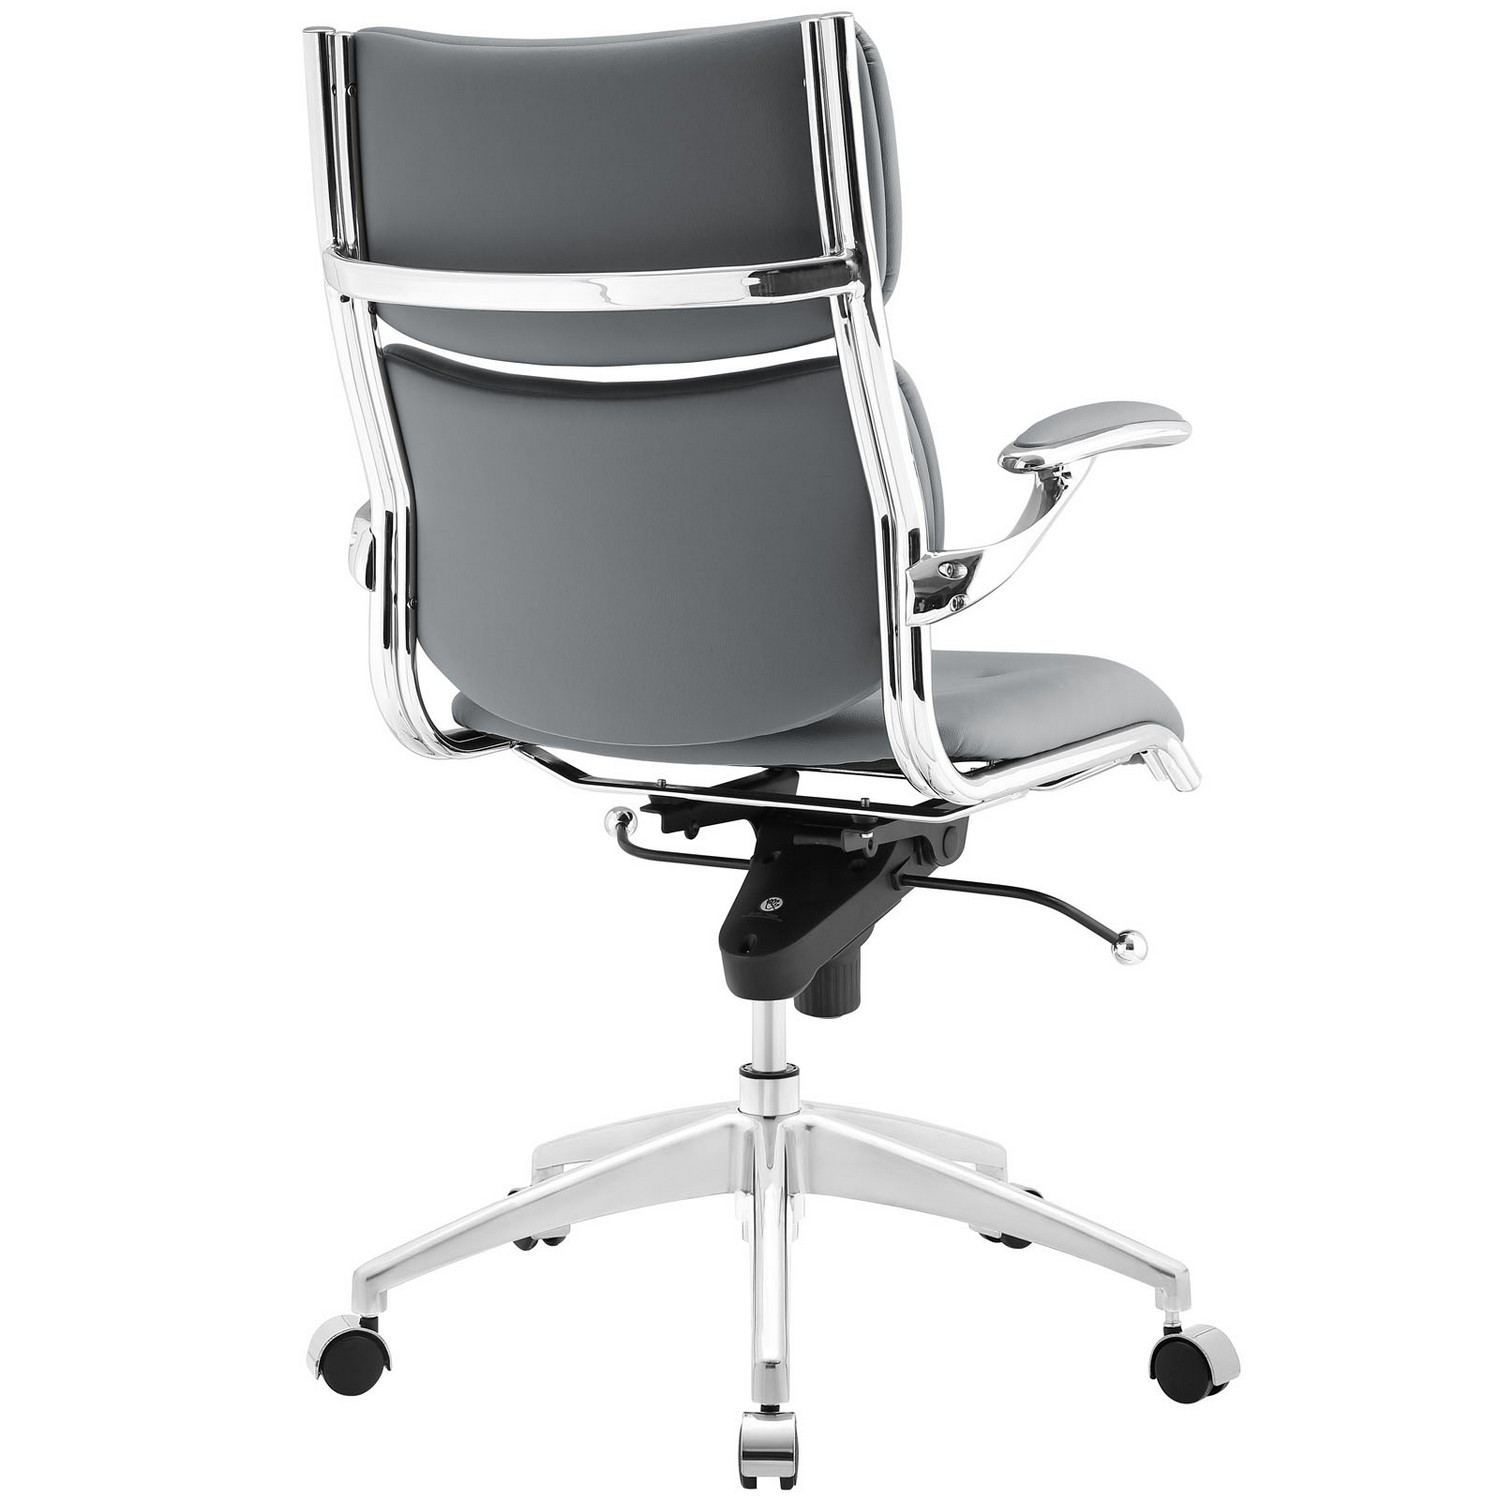 Modway Push Mid Back Office Chair - Gray